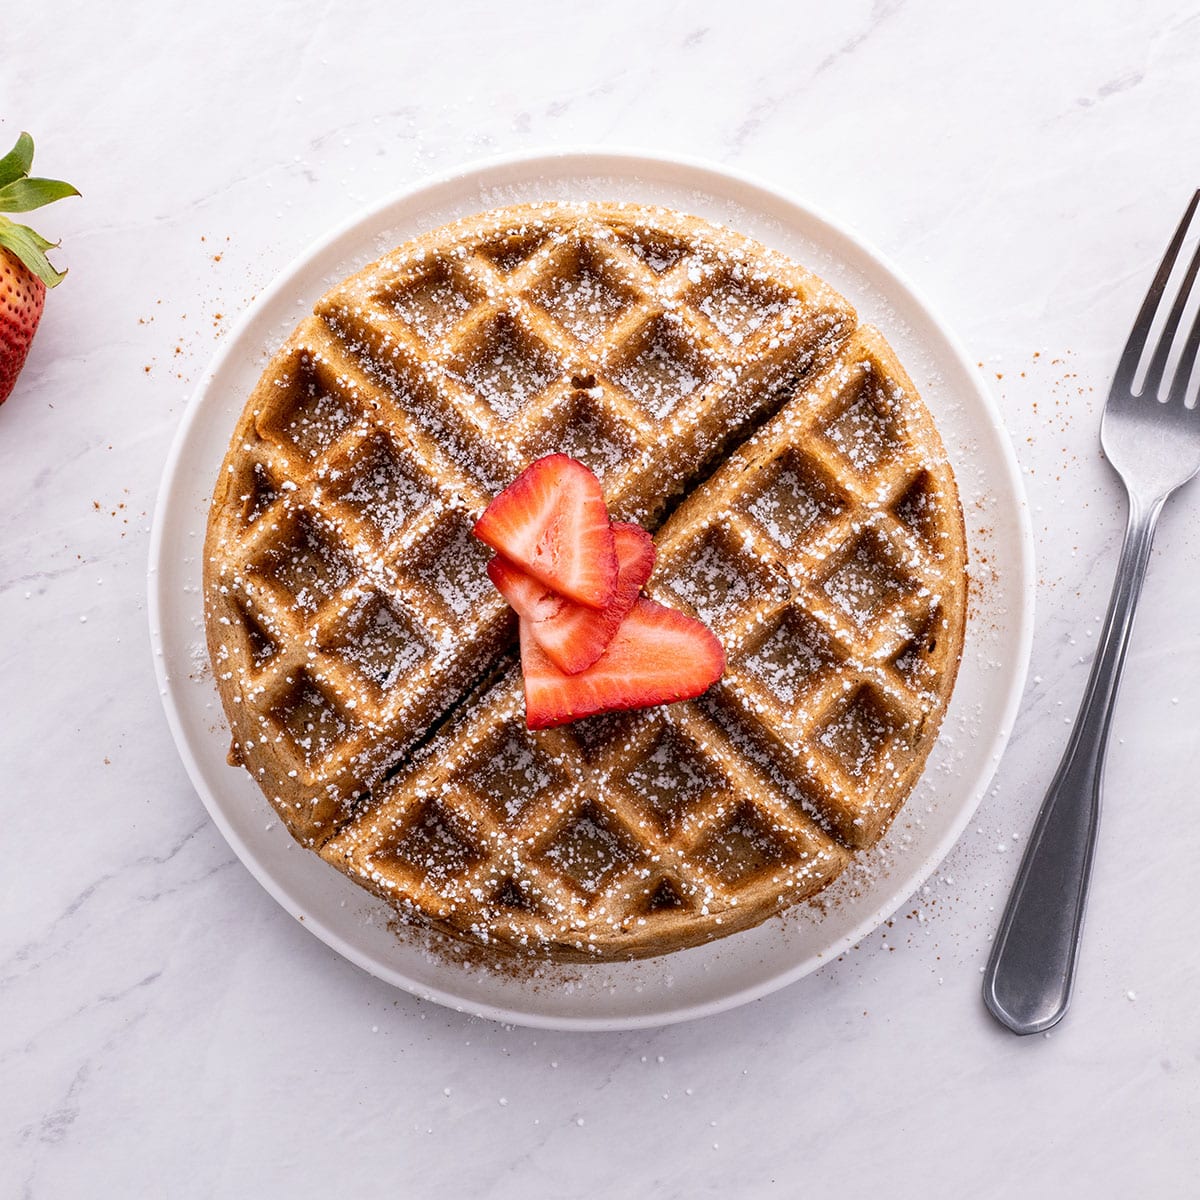 oatmeal waffle sitting on a white plate with strawberries and powdered sugar on top.